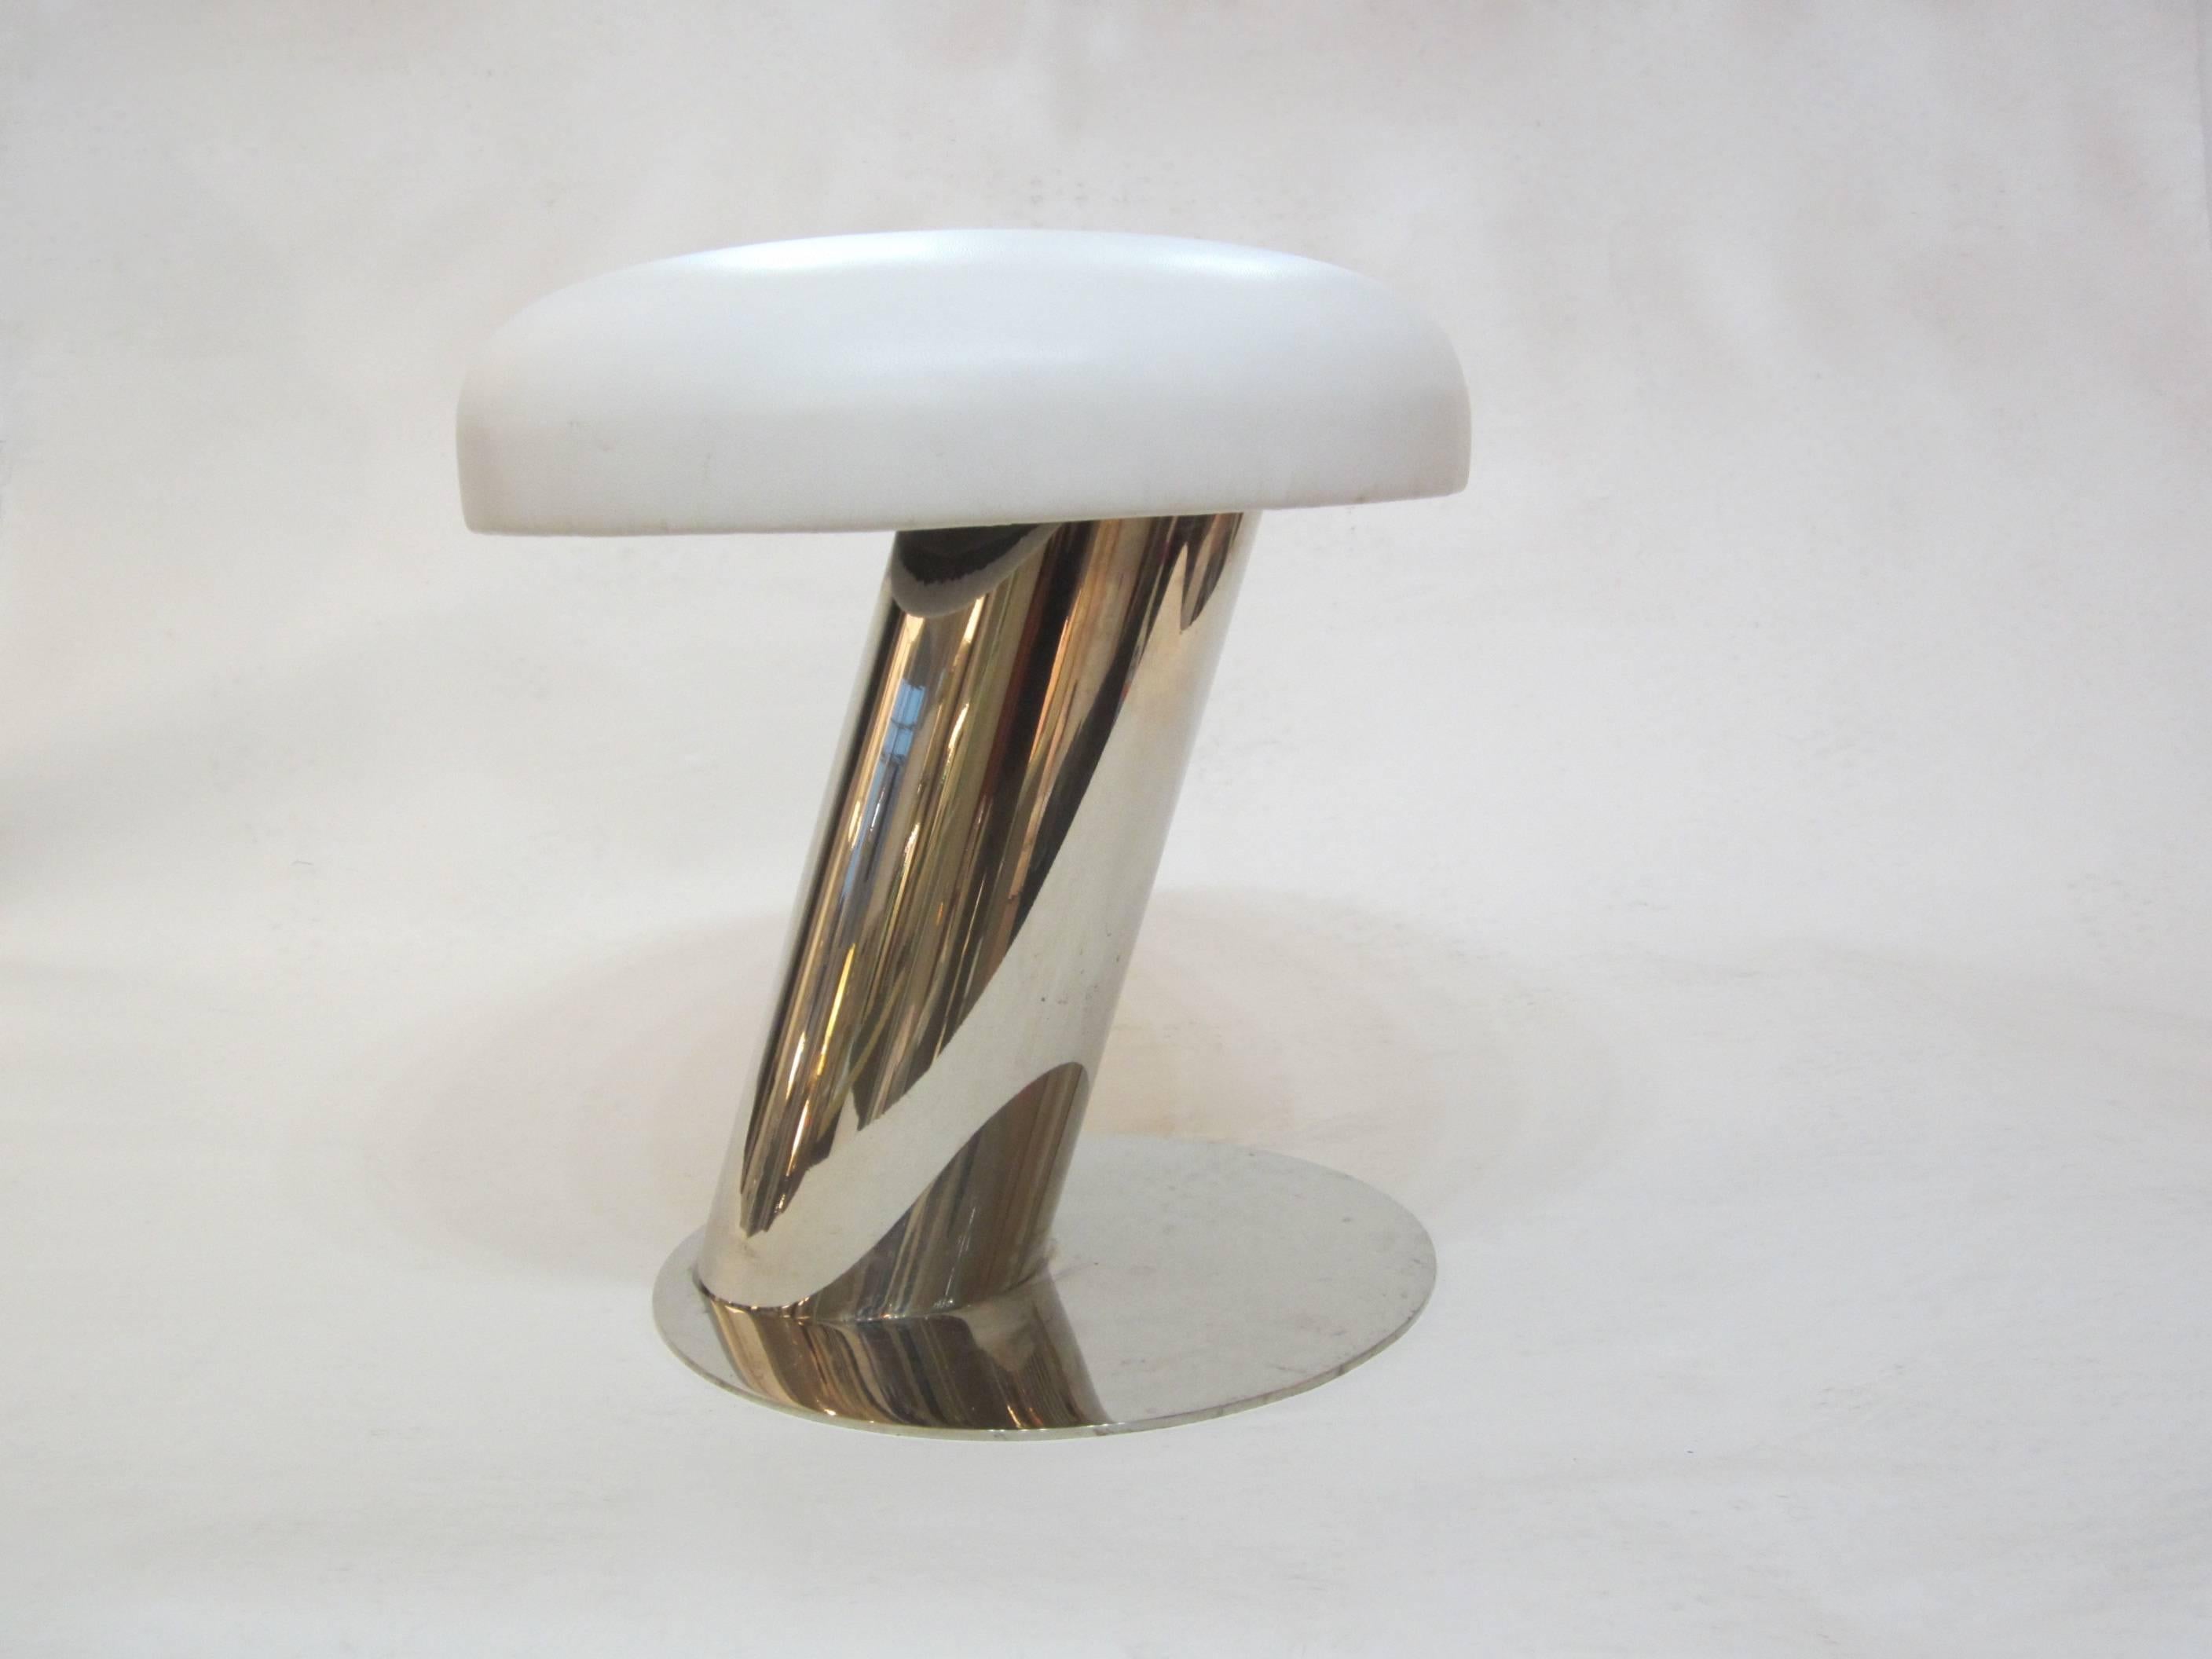 Karl Springer Cantilevered Steel and Cushion Stool  In Good Condition For Sale In Miami, FL